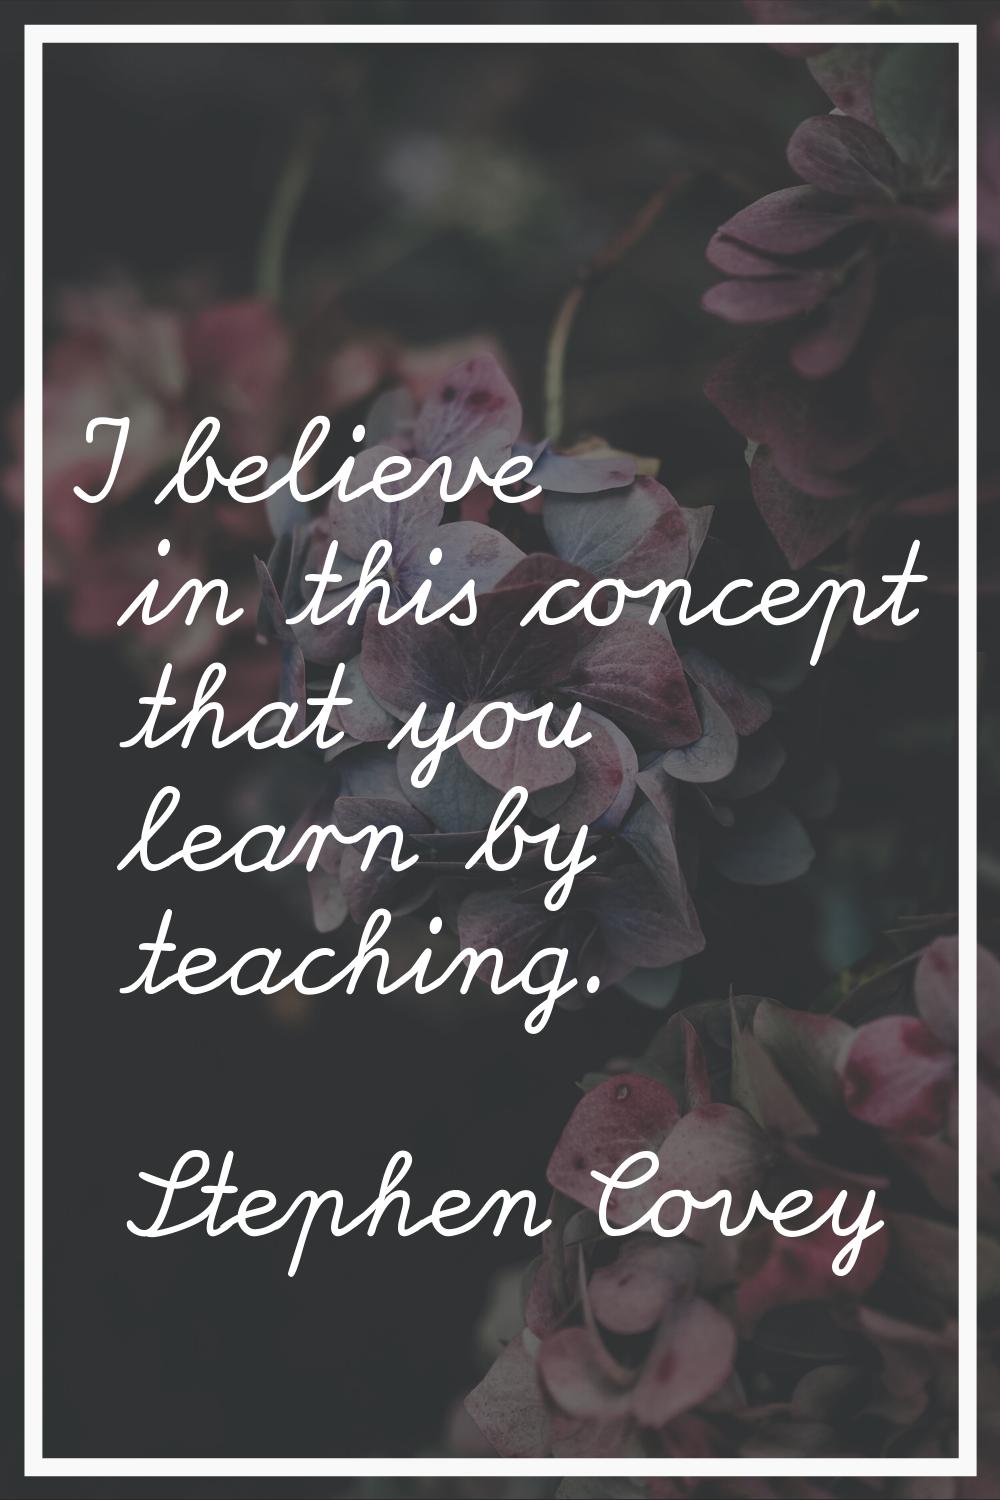 I believe in this concept that you learn by teaching.